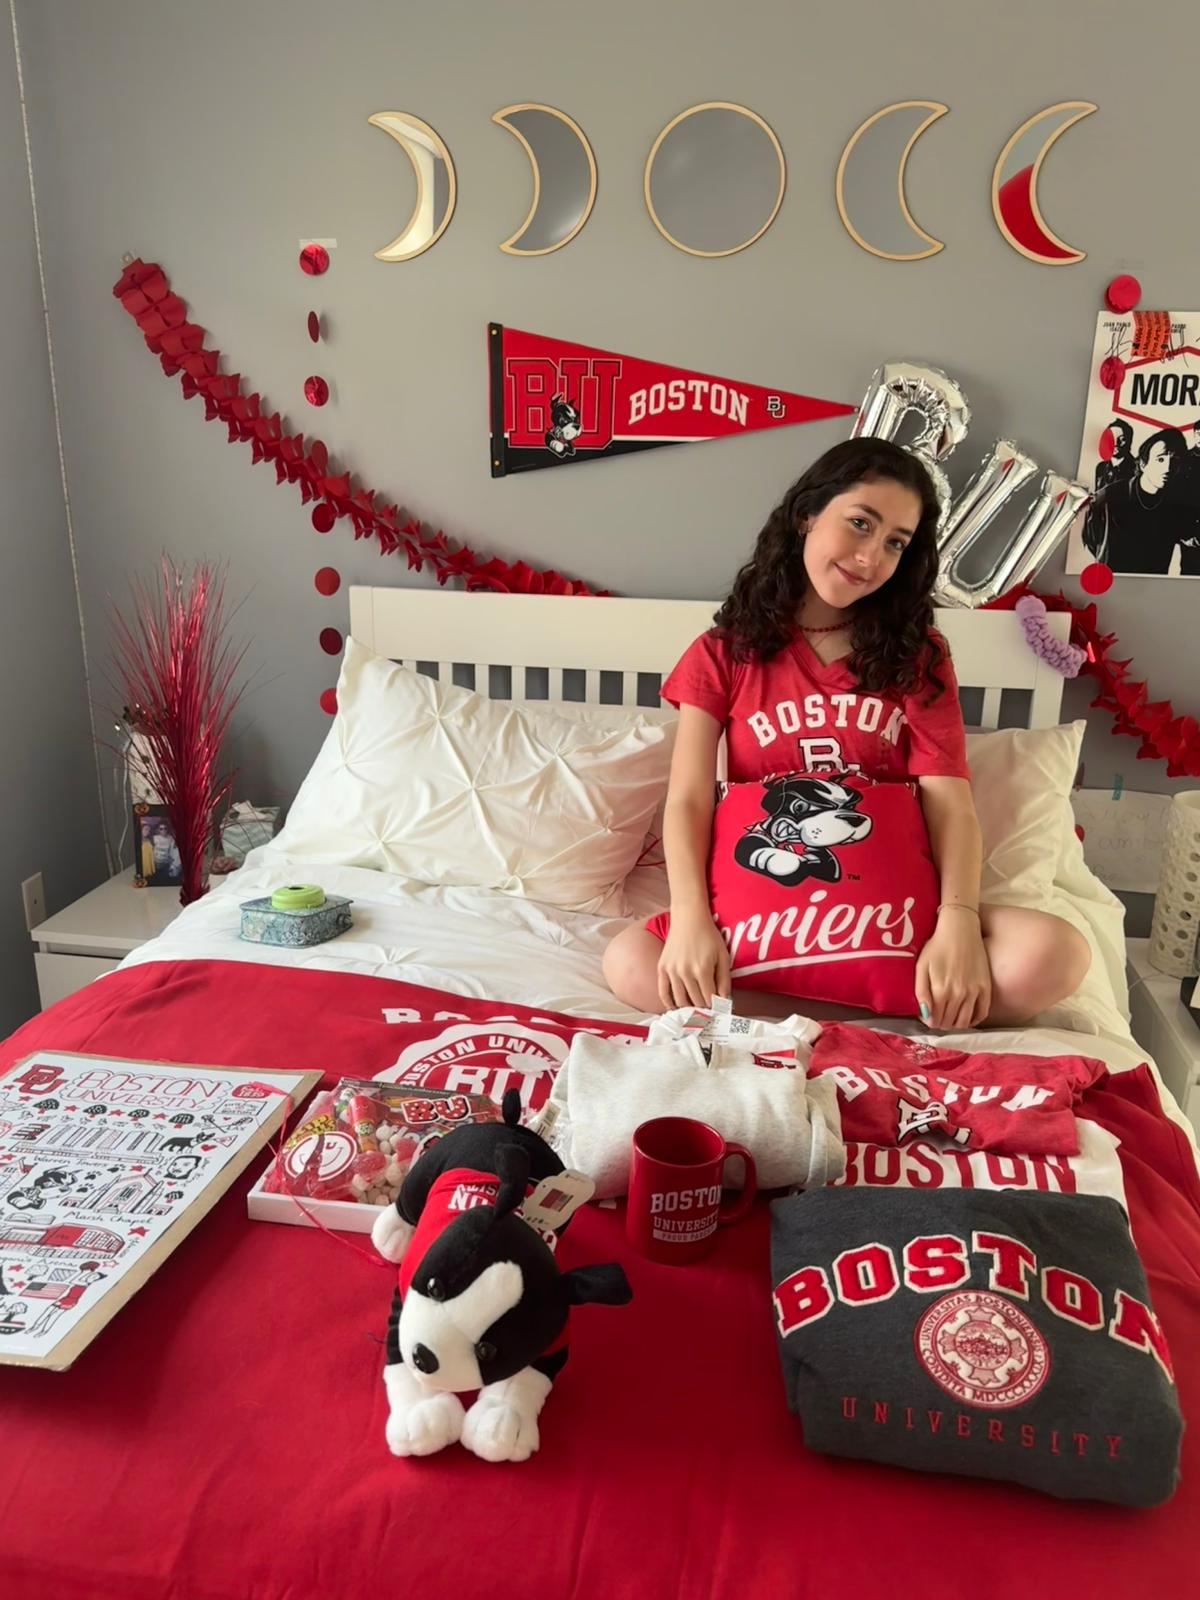 Senior Andrea Malpica celebrates her acceptance into Boston University. Malpicas family and friends decorated her bed with BU colors and merchandise  after she was accepted. (Sophi Massoumi)